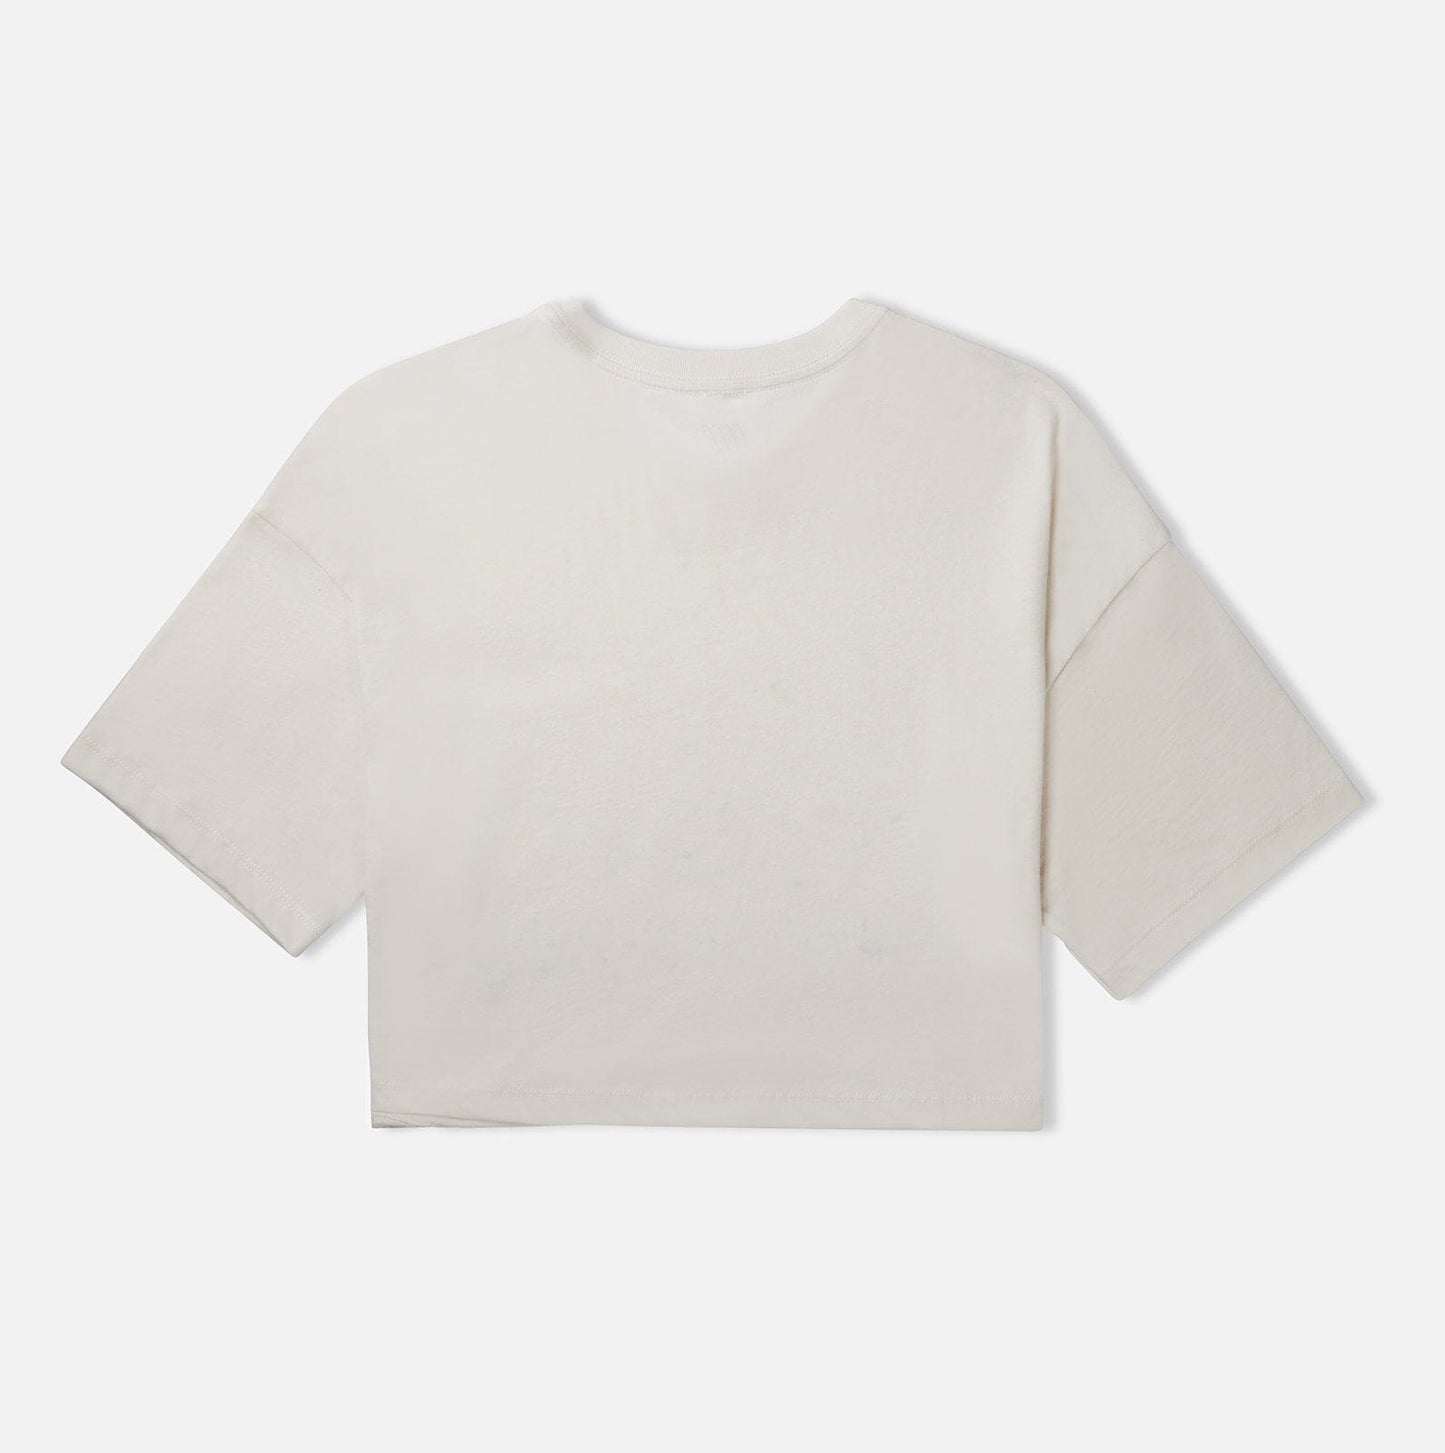 SOUTH SWELL Simple Wave Crop Tee W Tees SOUTH SWELL 